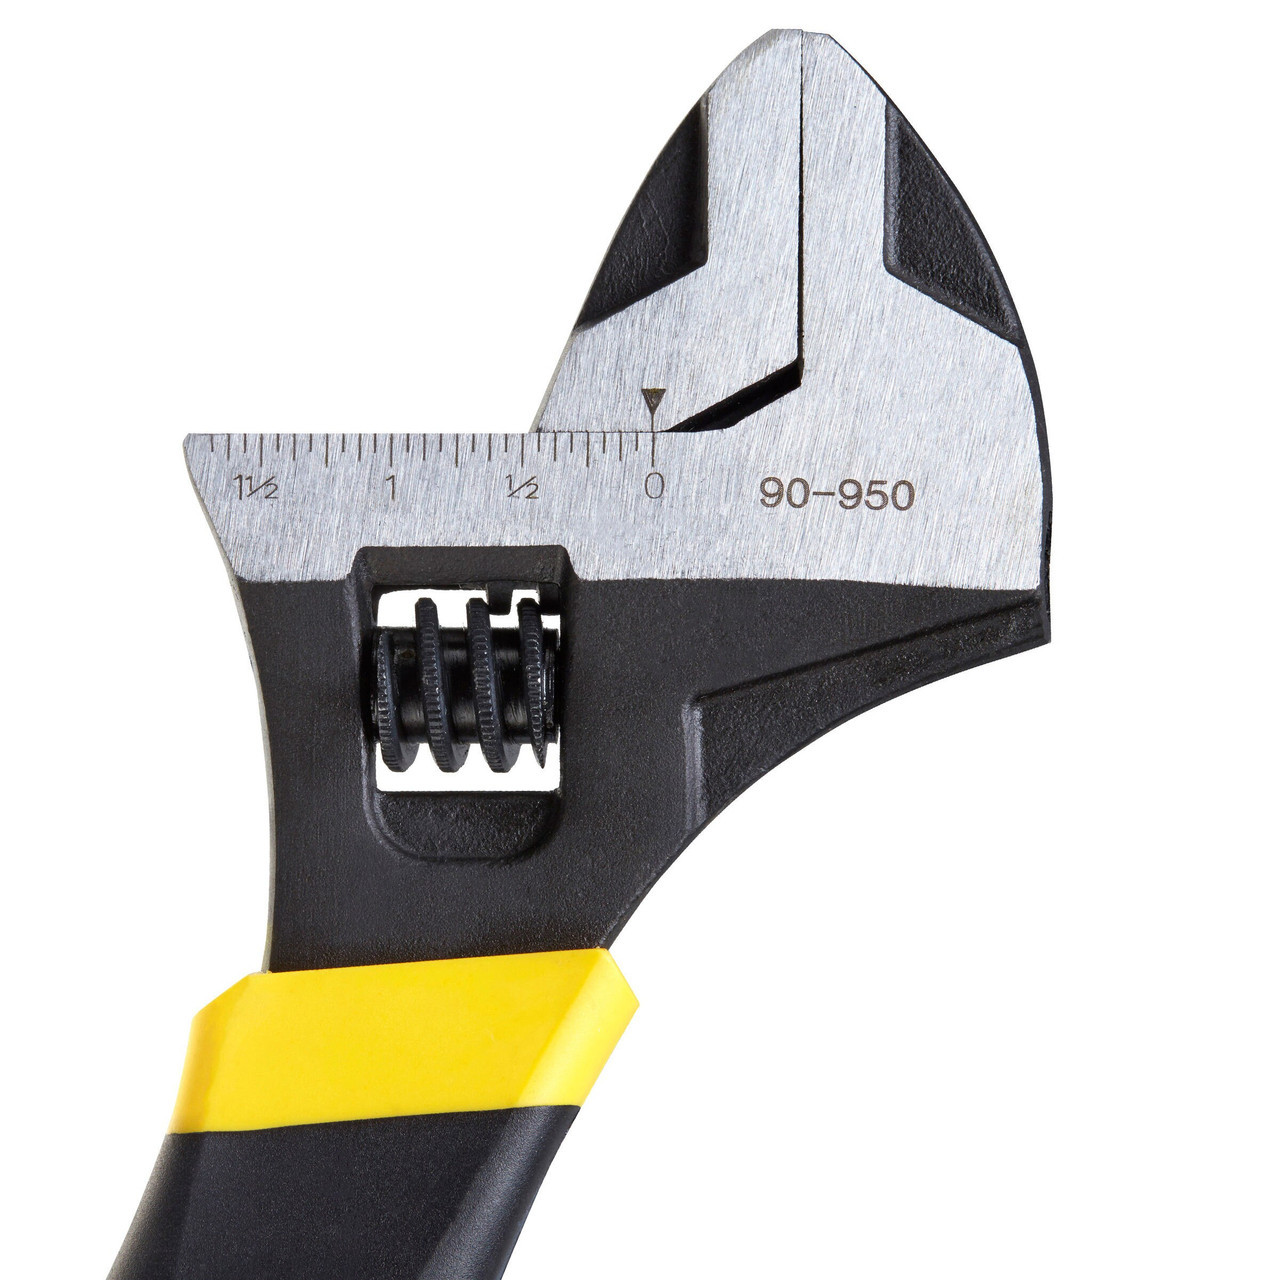 Stanley 0-90-950 MaxSteel Adjustable Wrench 12in / 300mm